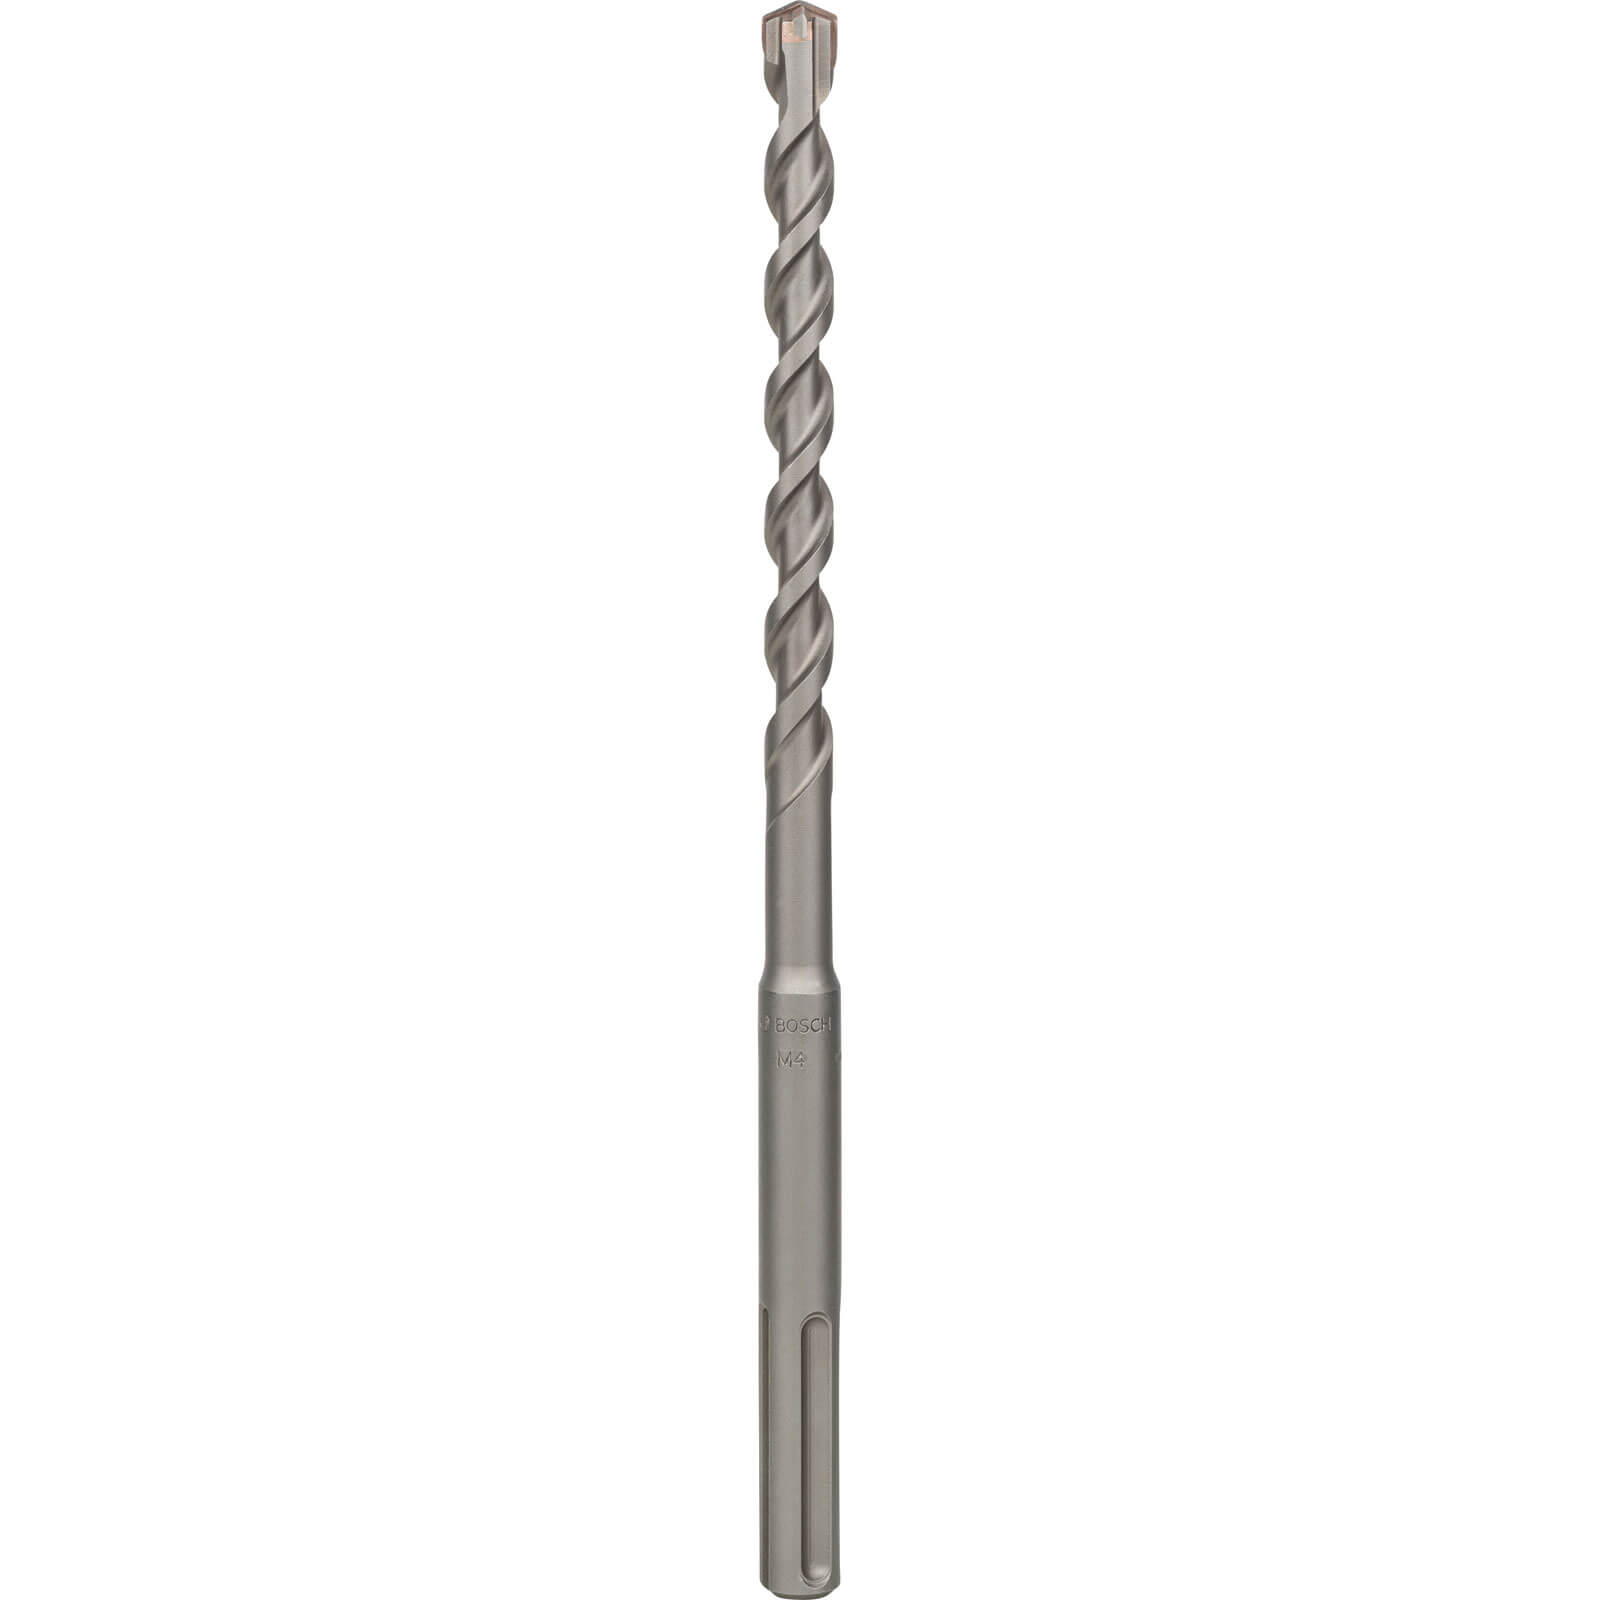 Image of Bosch M4 SDS Max Masonry Drill Bit 16mm 340mm Pack of 1